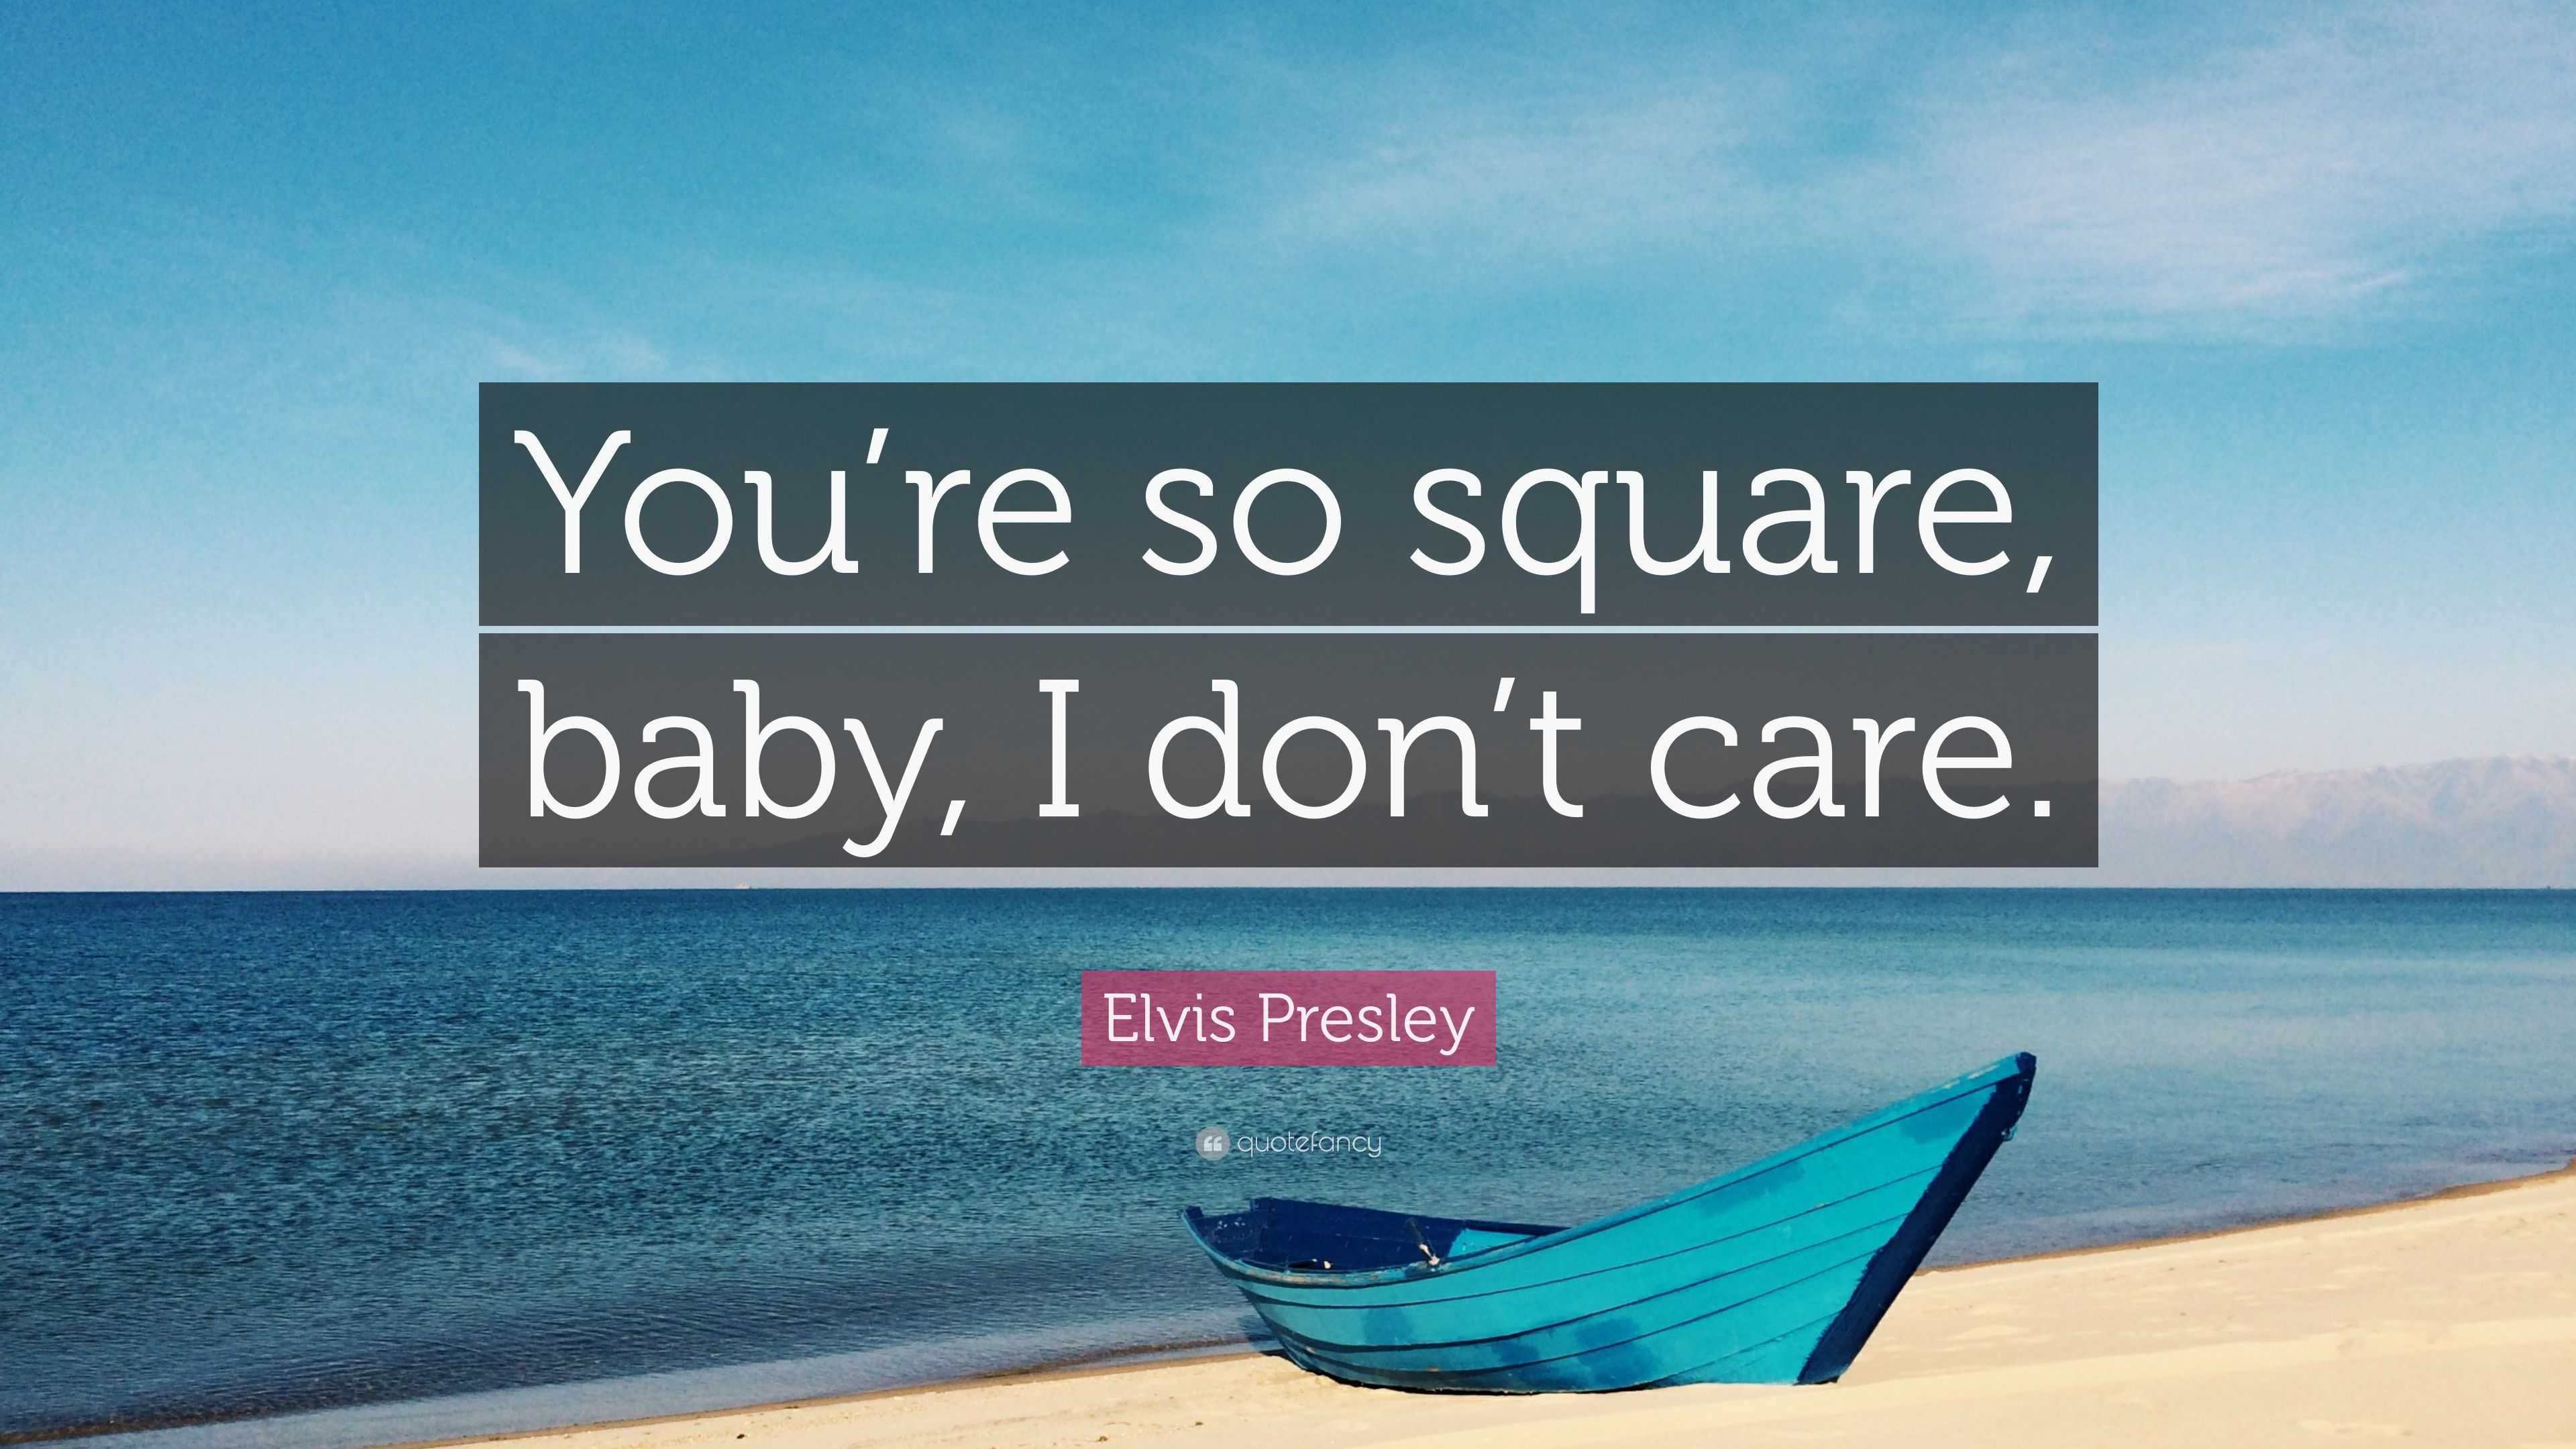 Elvis Presley Quote: "You're so square, baby, I don't care ...